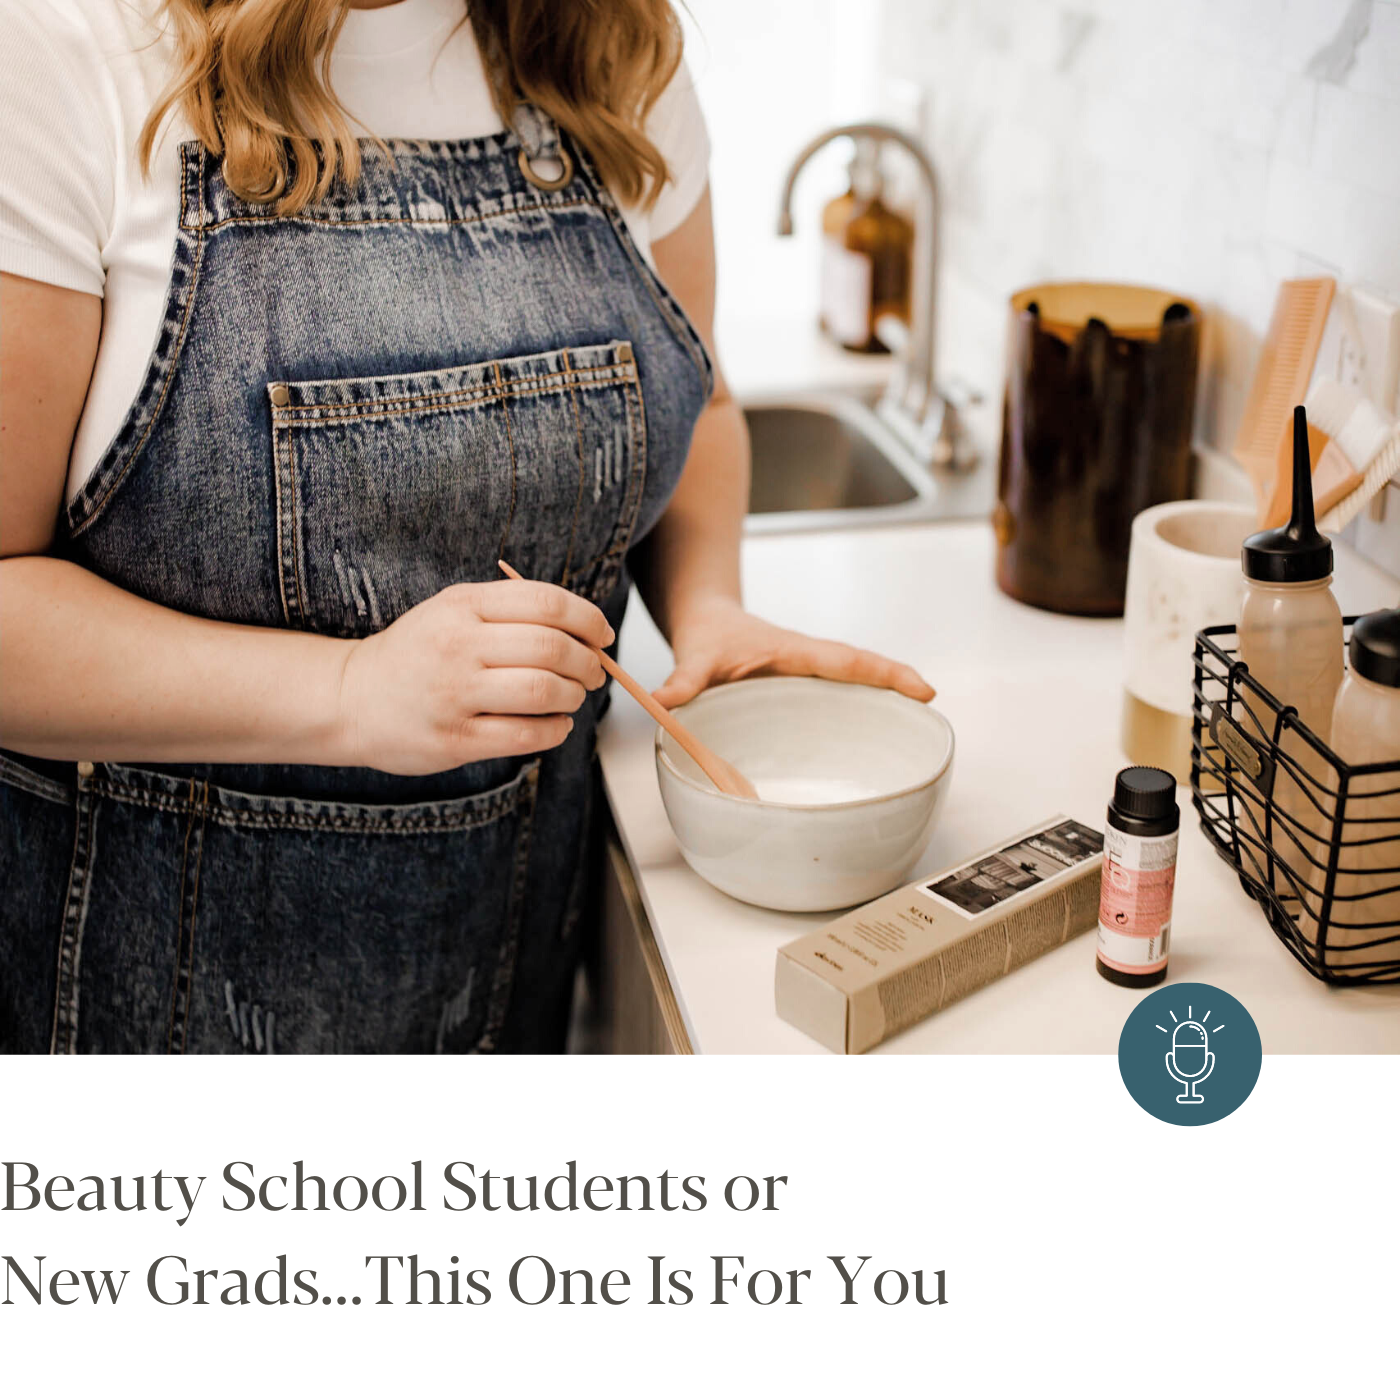 Episode #273 - Beauty School Students or New Grads...This One Is For You